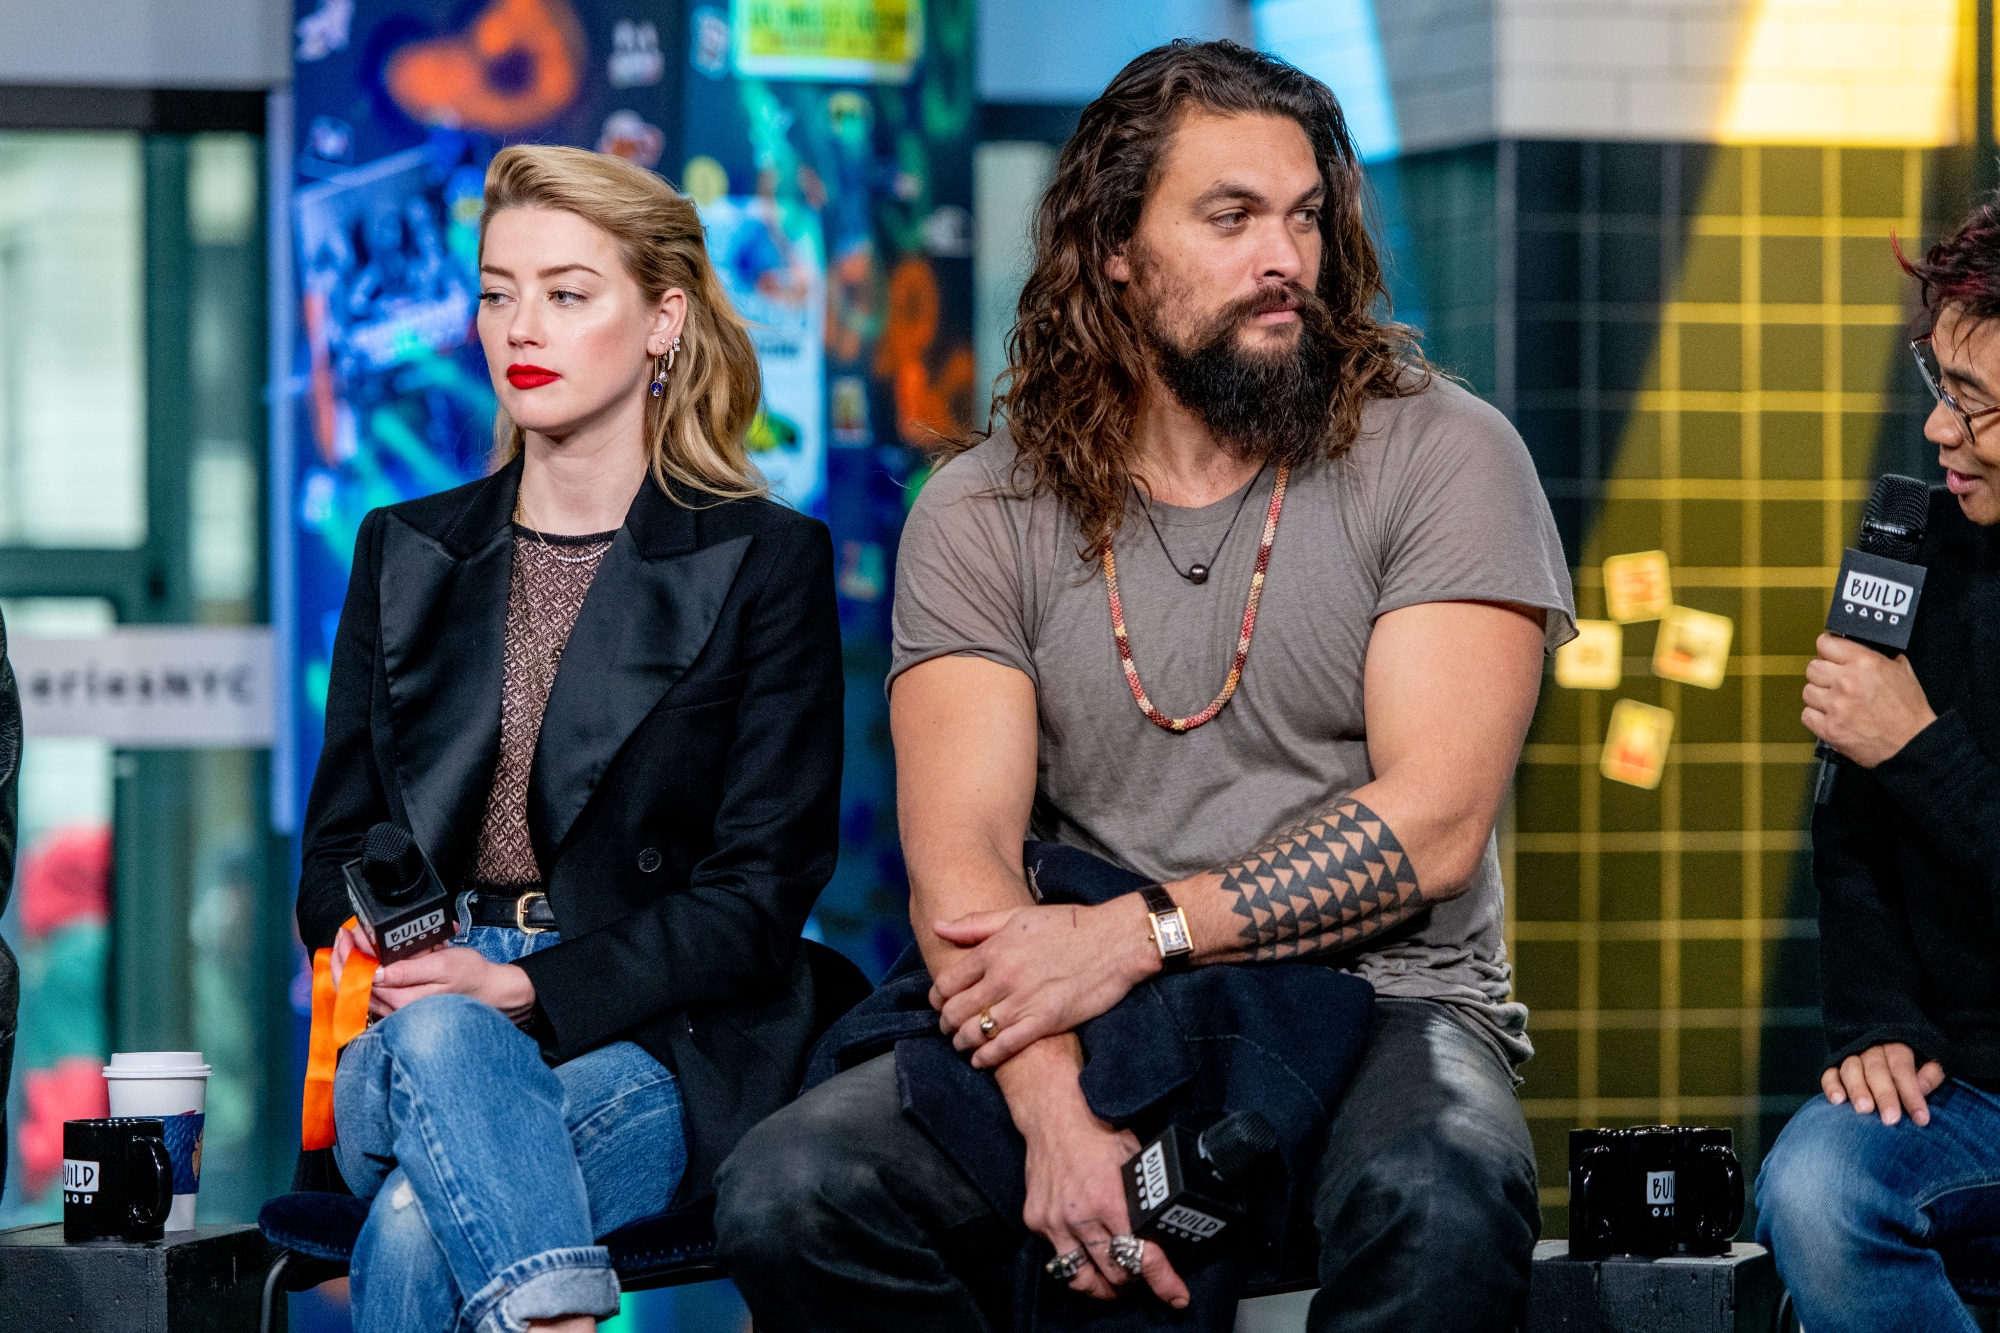 Amber Heard Said Jason Momoa Was ‘Allergic’ to Not Getting Attention on ‘Aquaman’